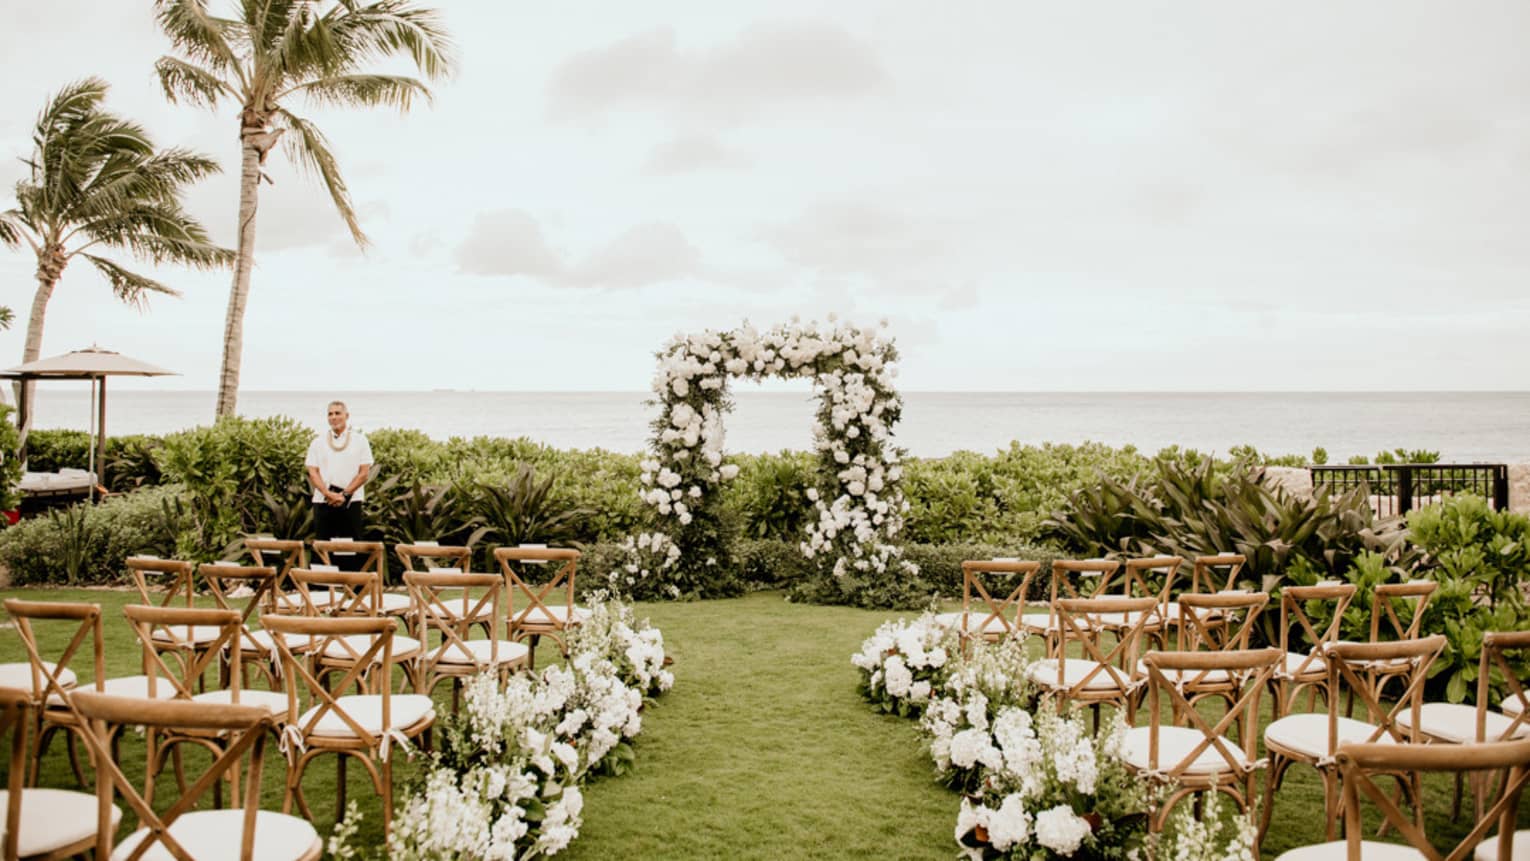 An outdoor wedding venue near the ocean, with wood chairs and flowers along a path.